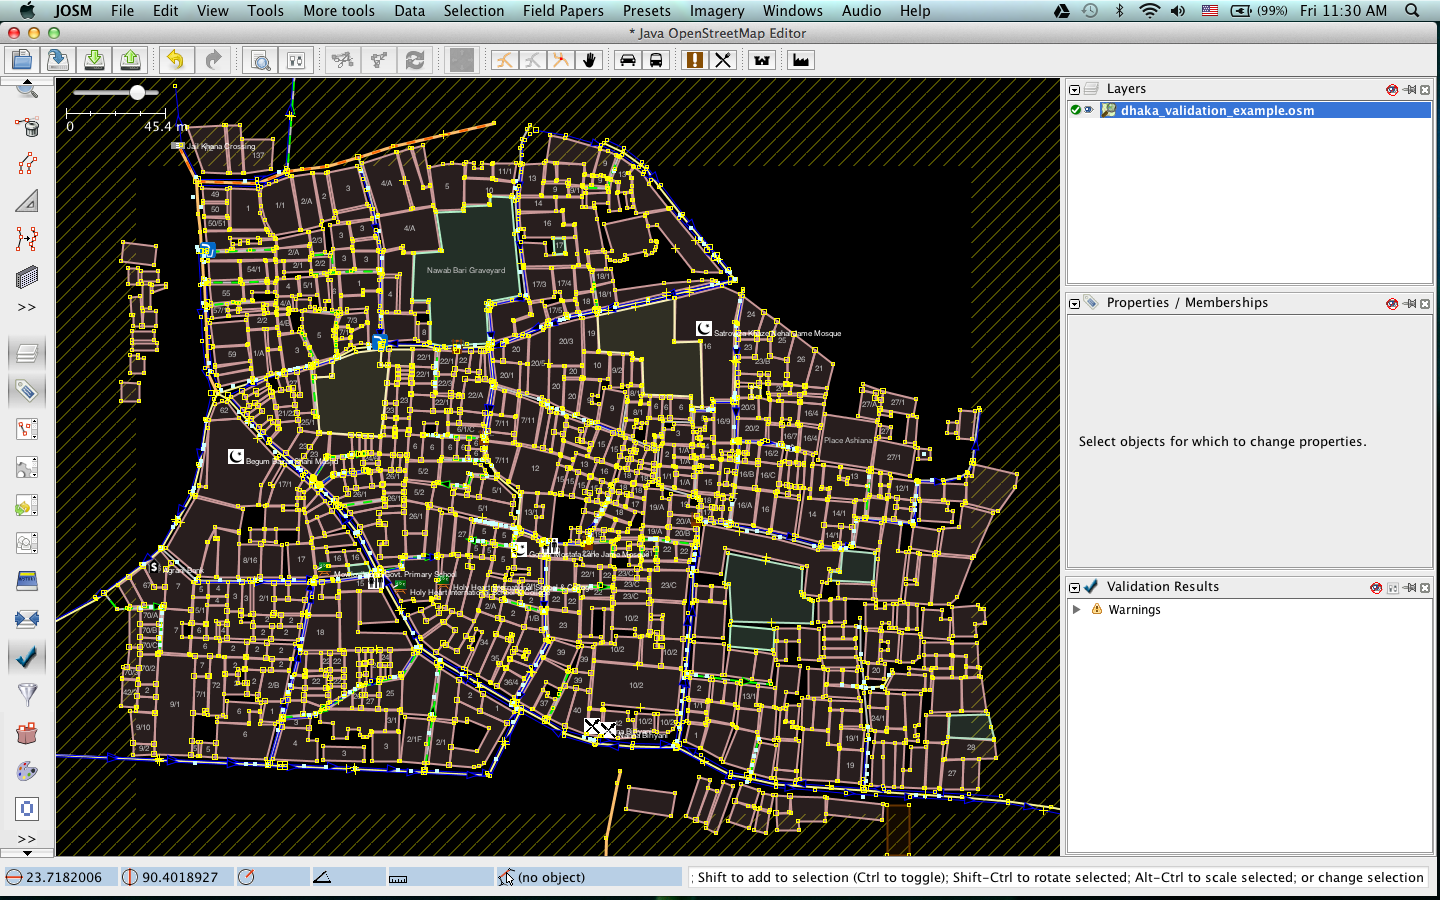 _images/reviewing_osm_data_image03.png